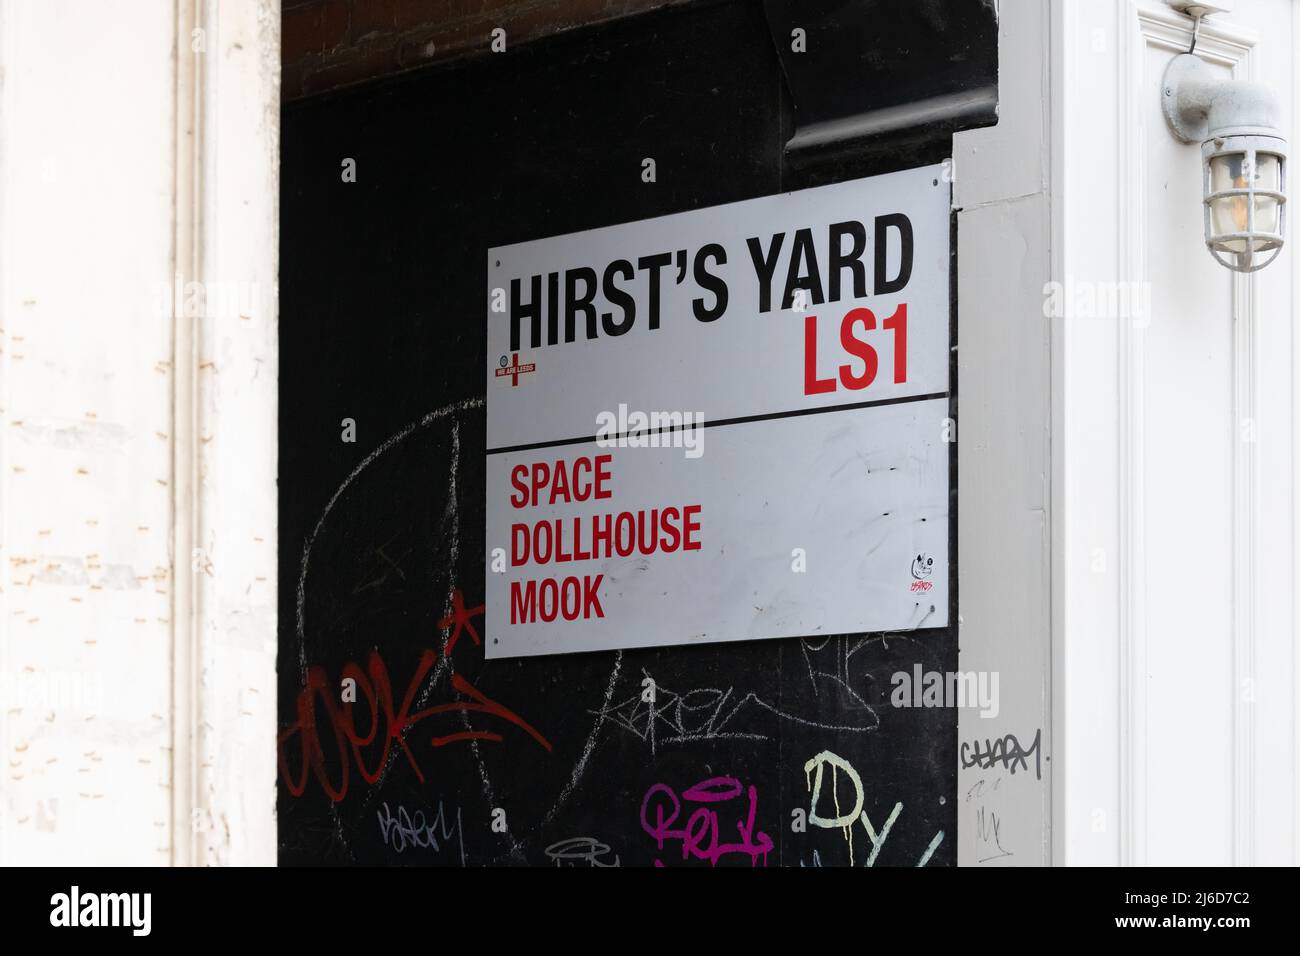 Hirst's Yard LS1 sign - Space, Dollhouse, Mook - off Call Lane, Leeds, West Yorkshire, England, UK Stock Photo